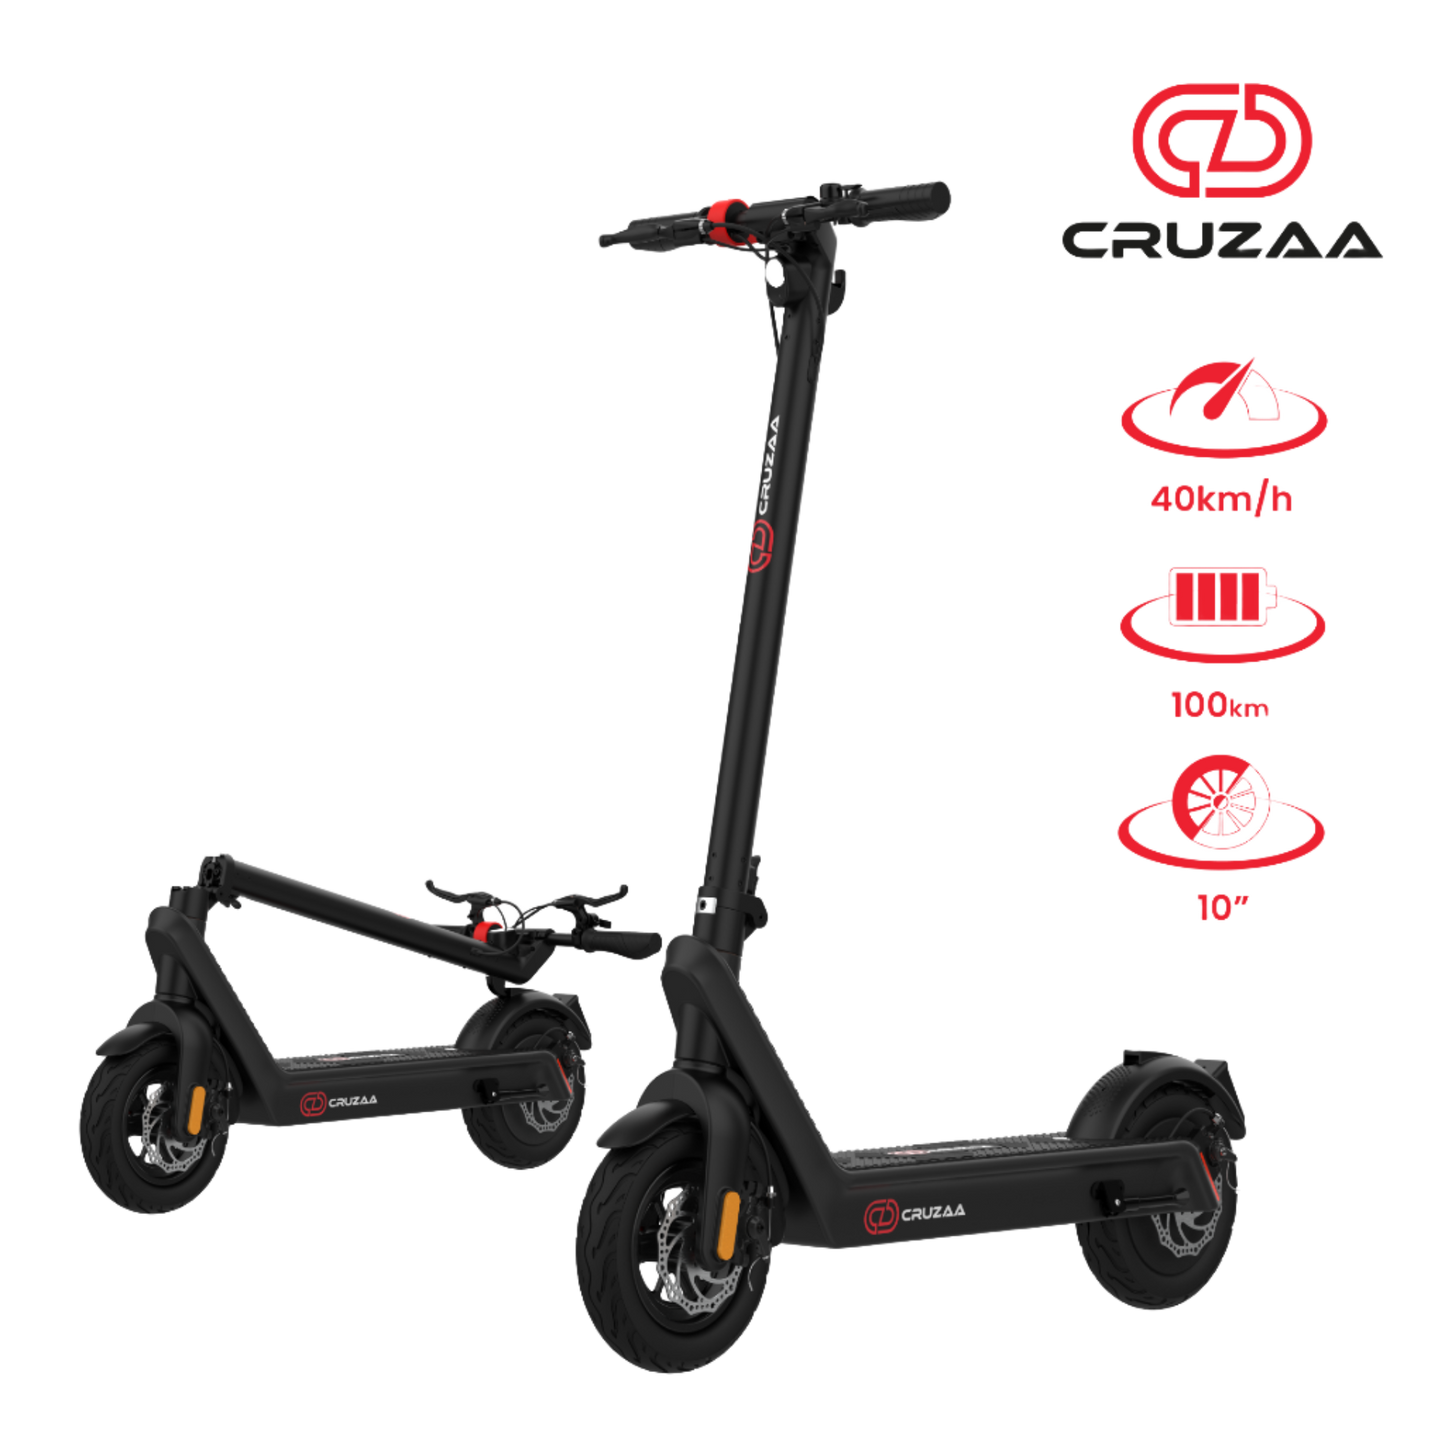 Commuta Pro Max Electric Foldable Scooter - 75km Range and 40kmh Max Speed